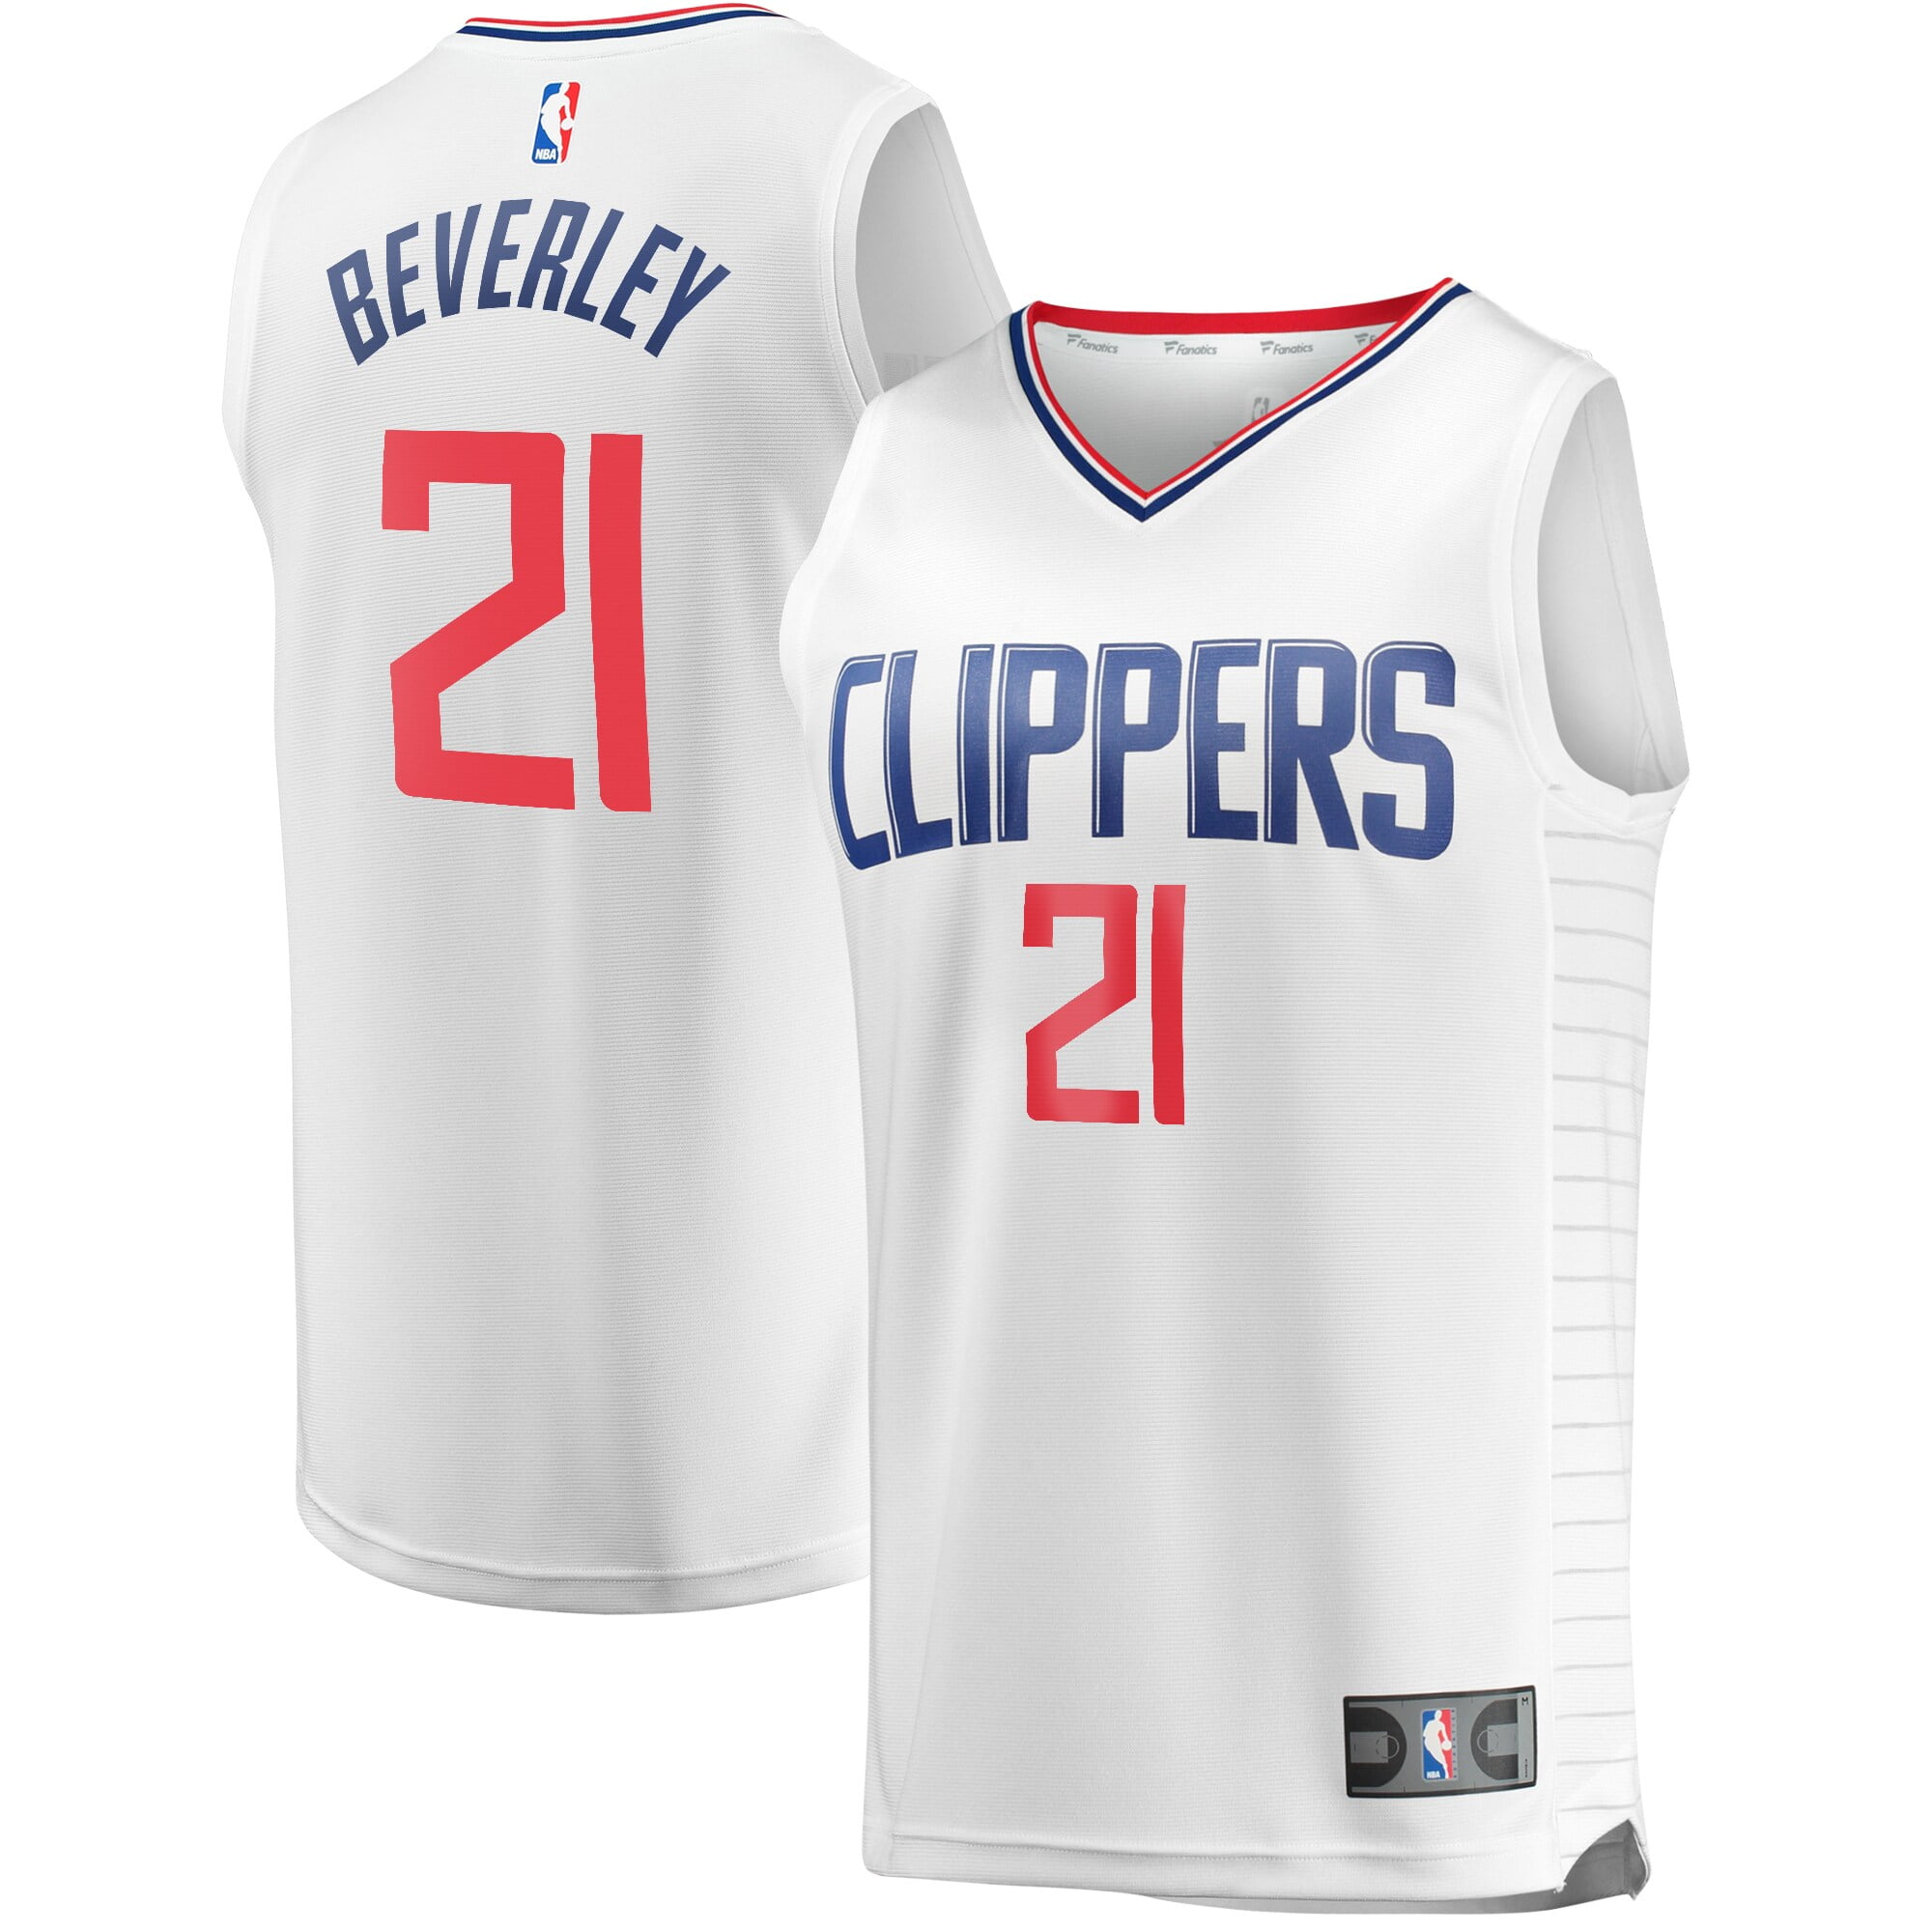 clippers beverley jersey